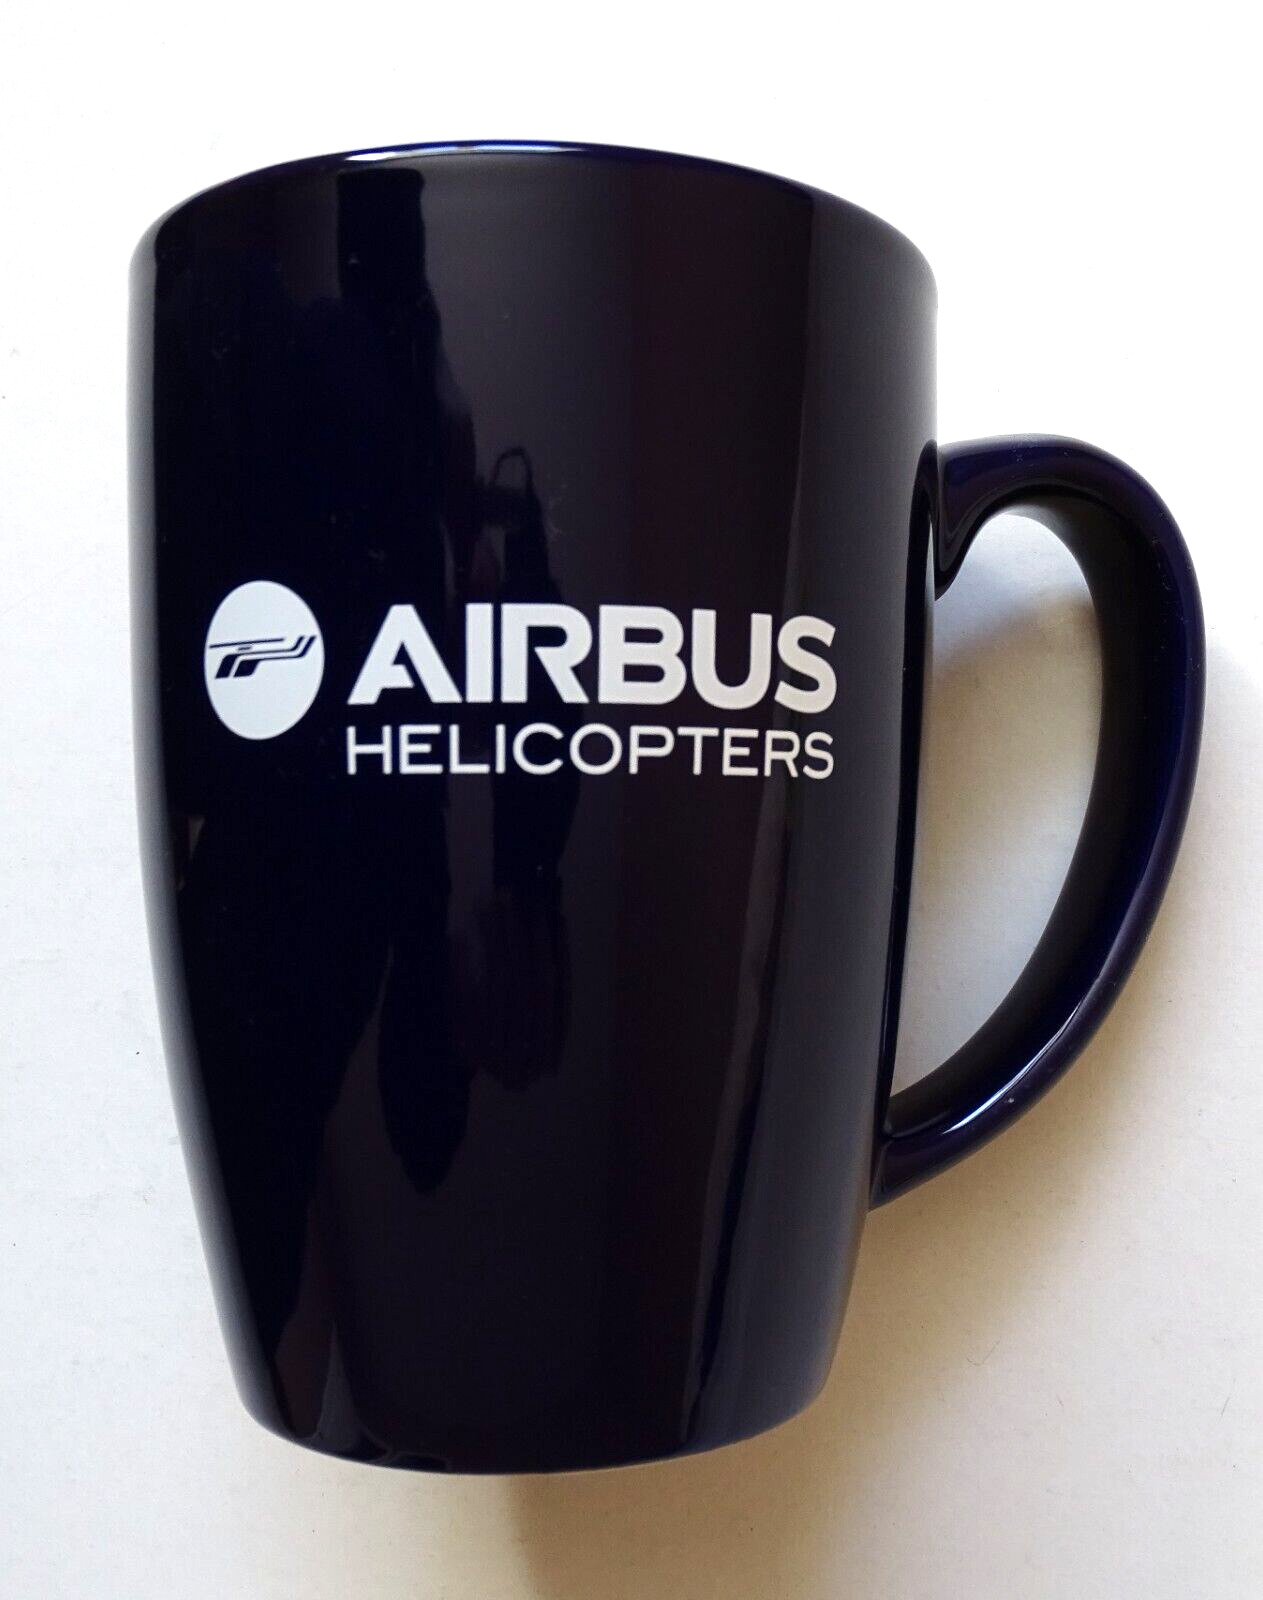 Genuine AIRBUS HELICOPTERS 14 oz Ceramic mug /cup Eurocopter NOT A REPRO